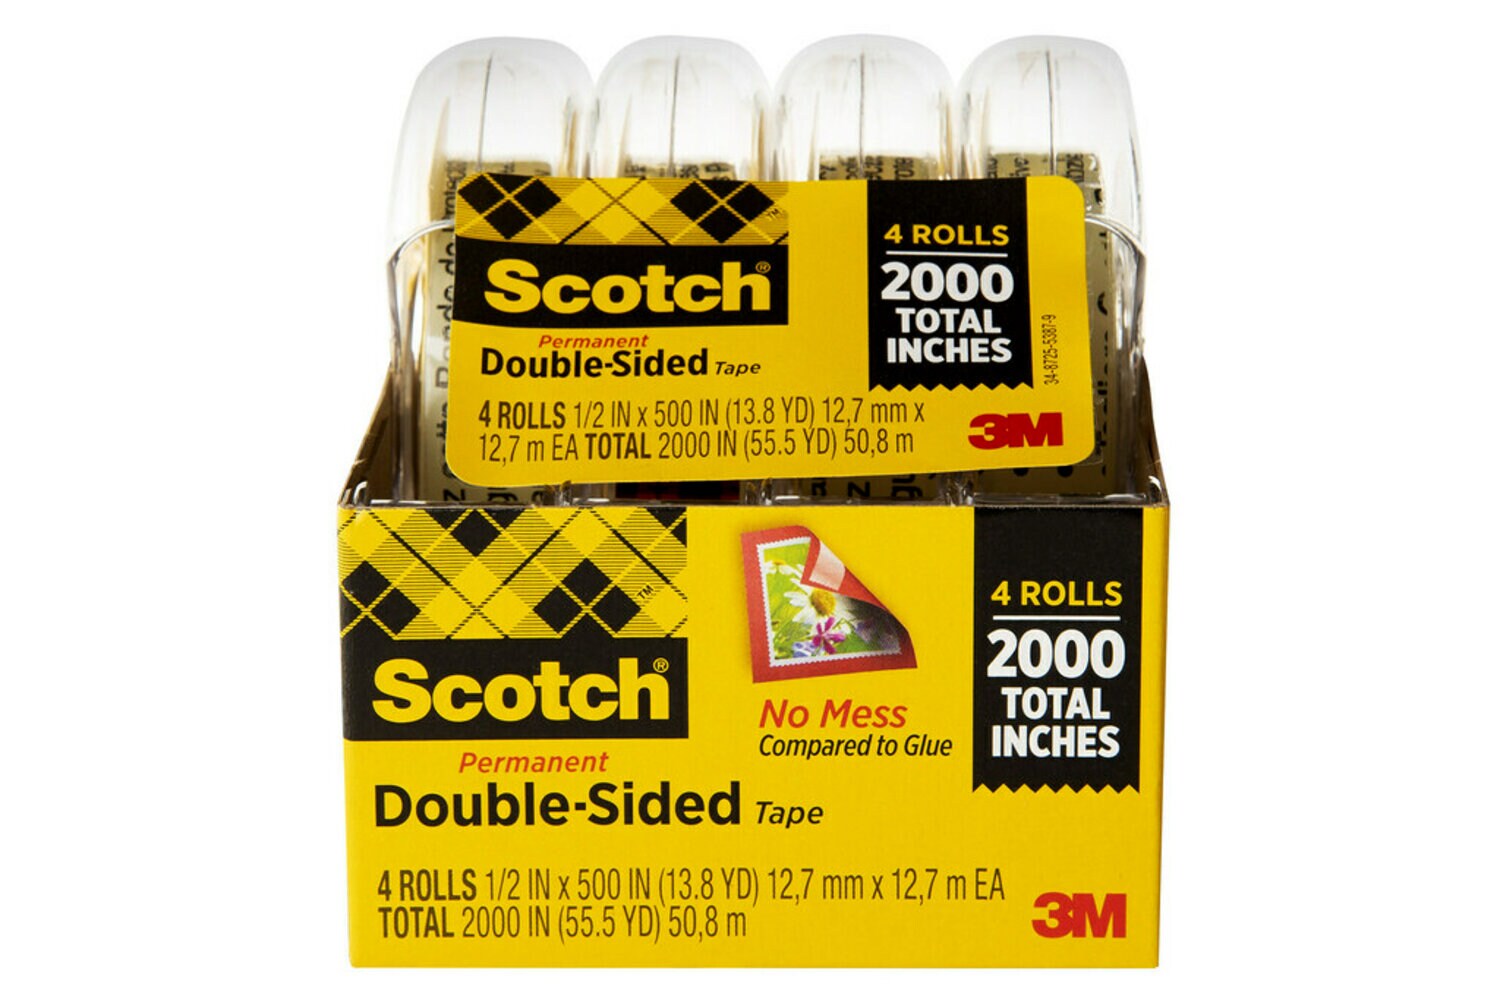 7010415114 - Scotch Double Sided Tape, 4137, 1/2 in x 400 in